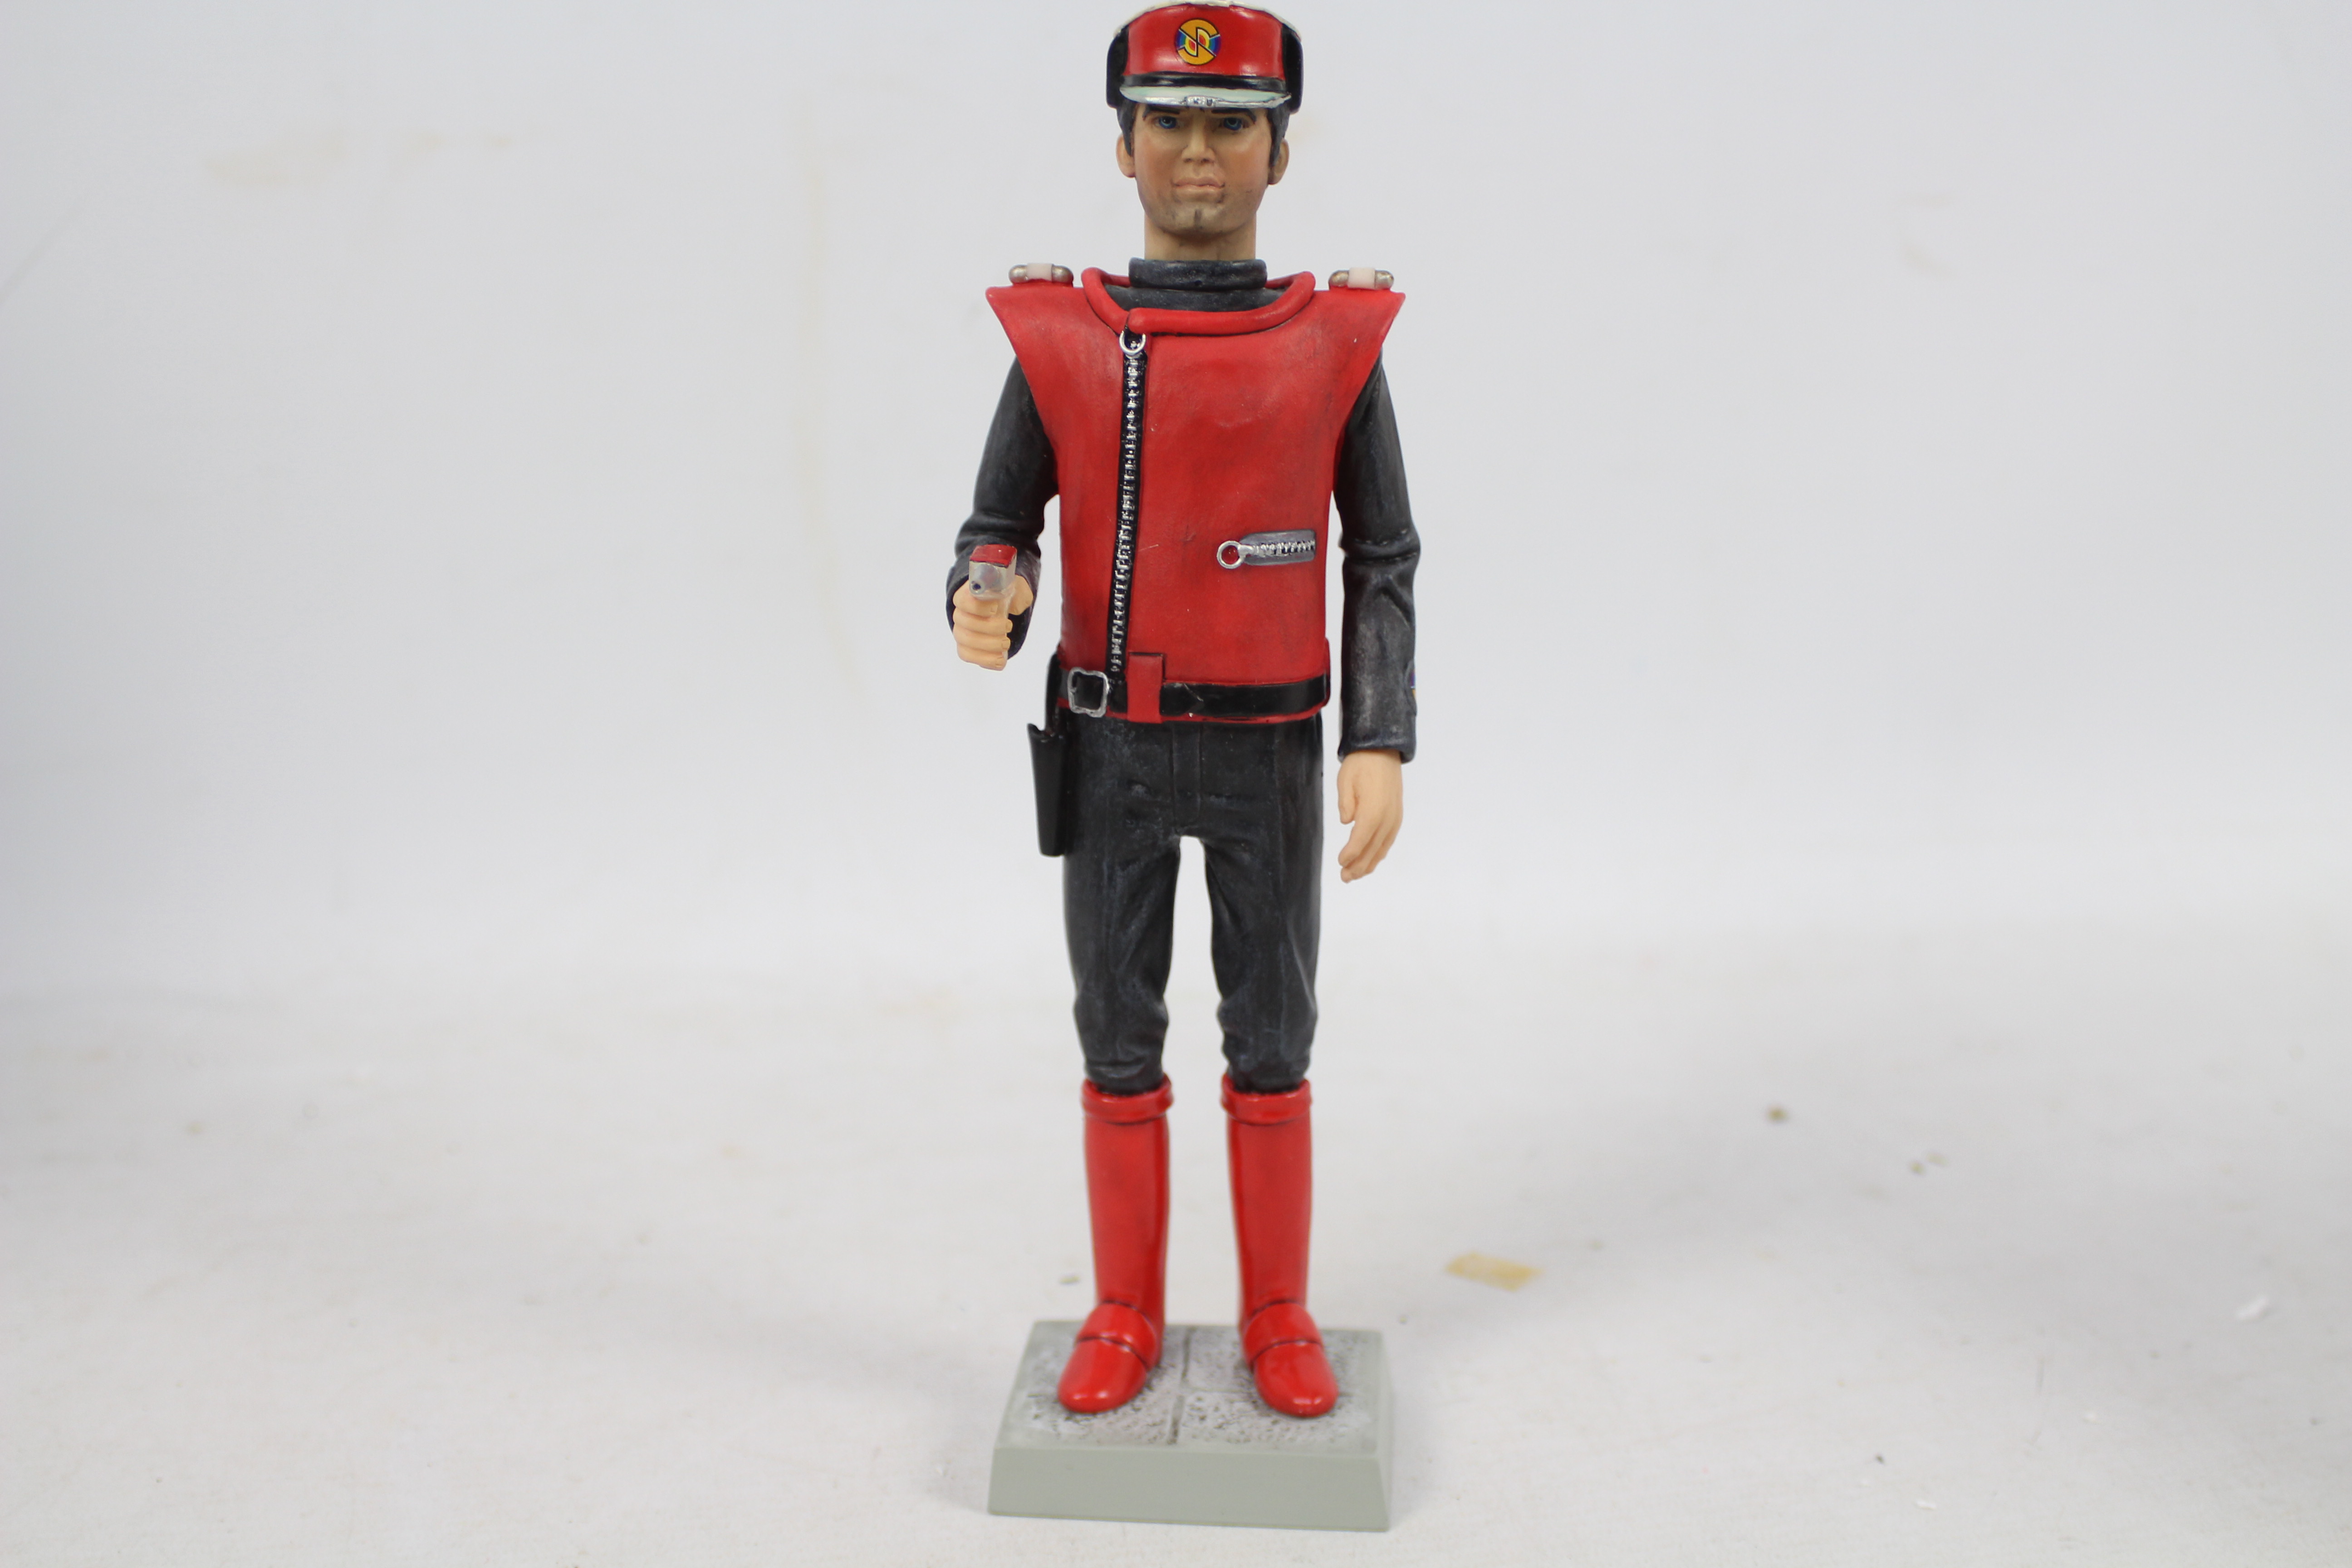 Captain Scarlet - A limited edition Robert Harrop figure of Captain Scarlet from the Gerry Anderson - Image 2 of 4